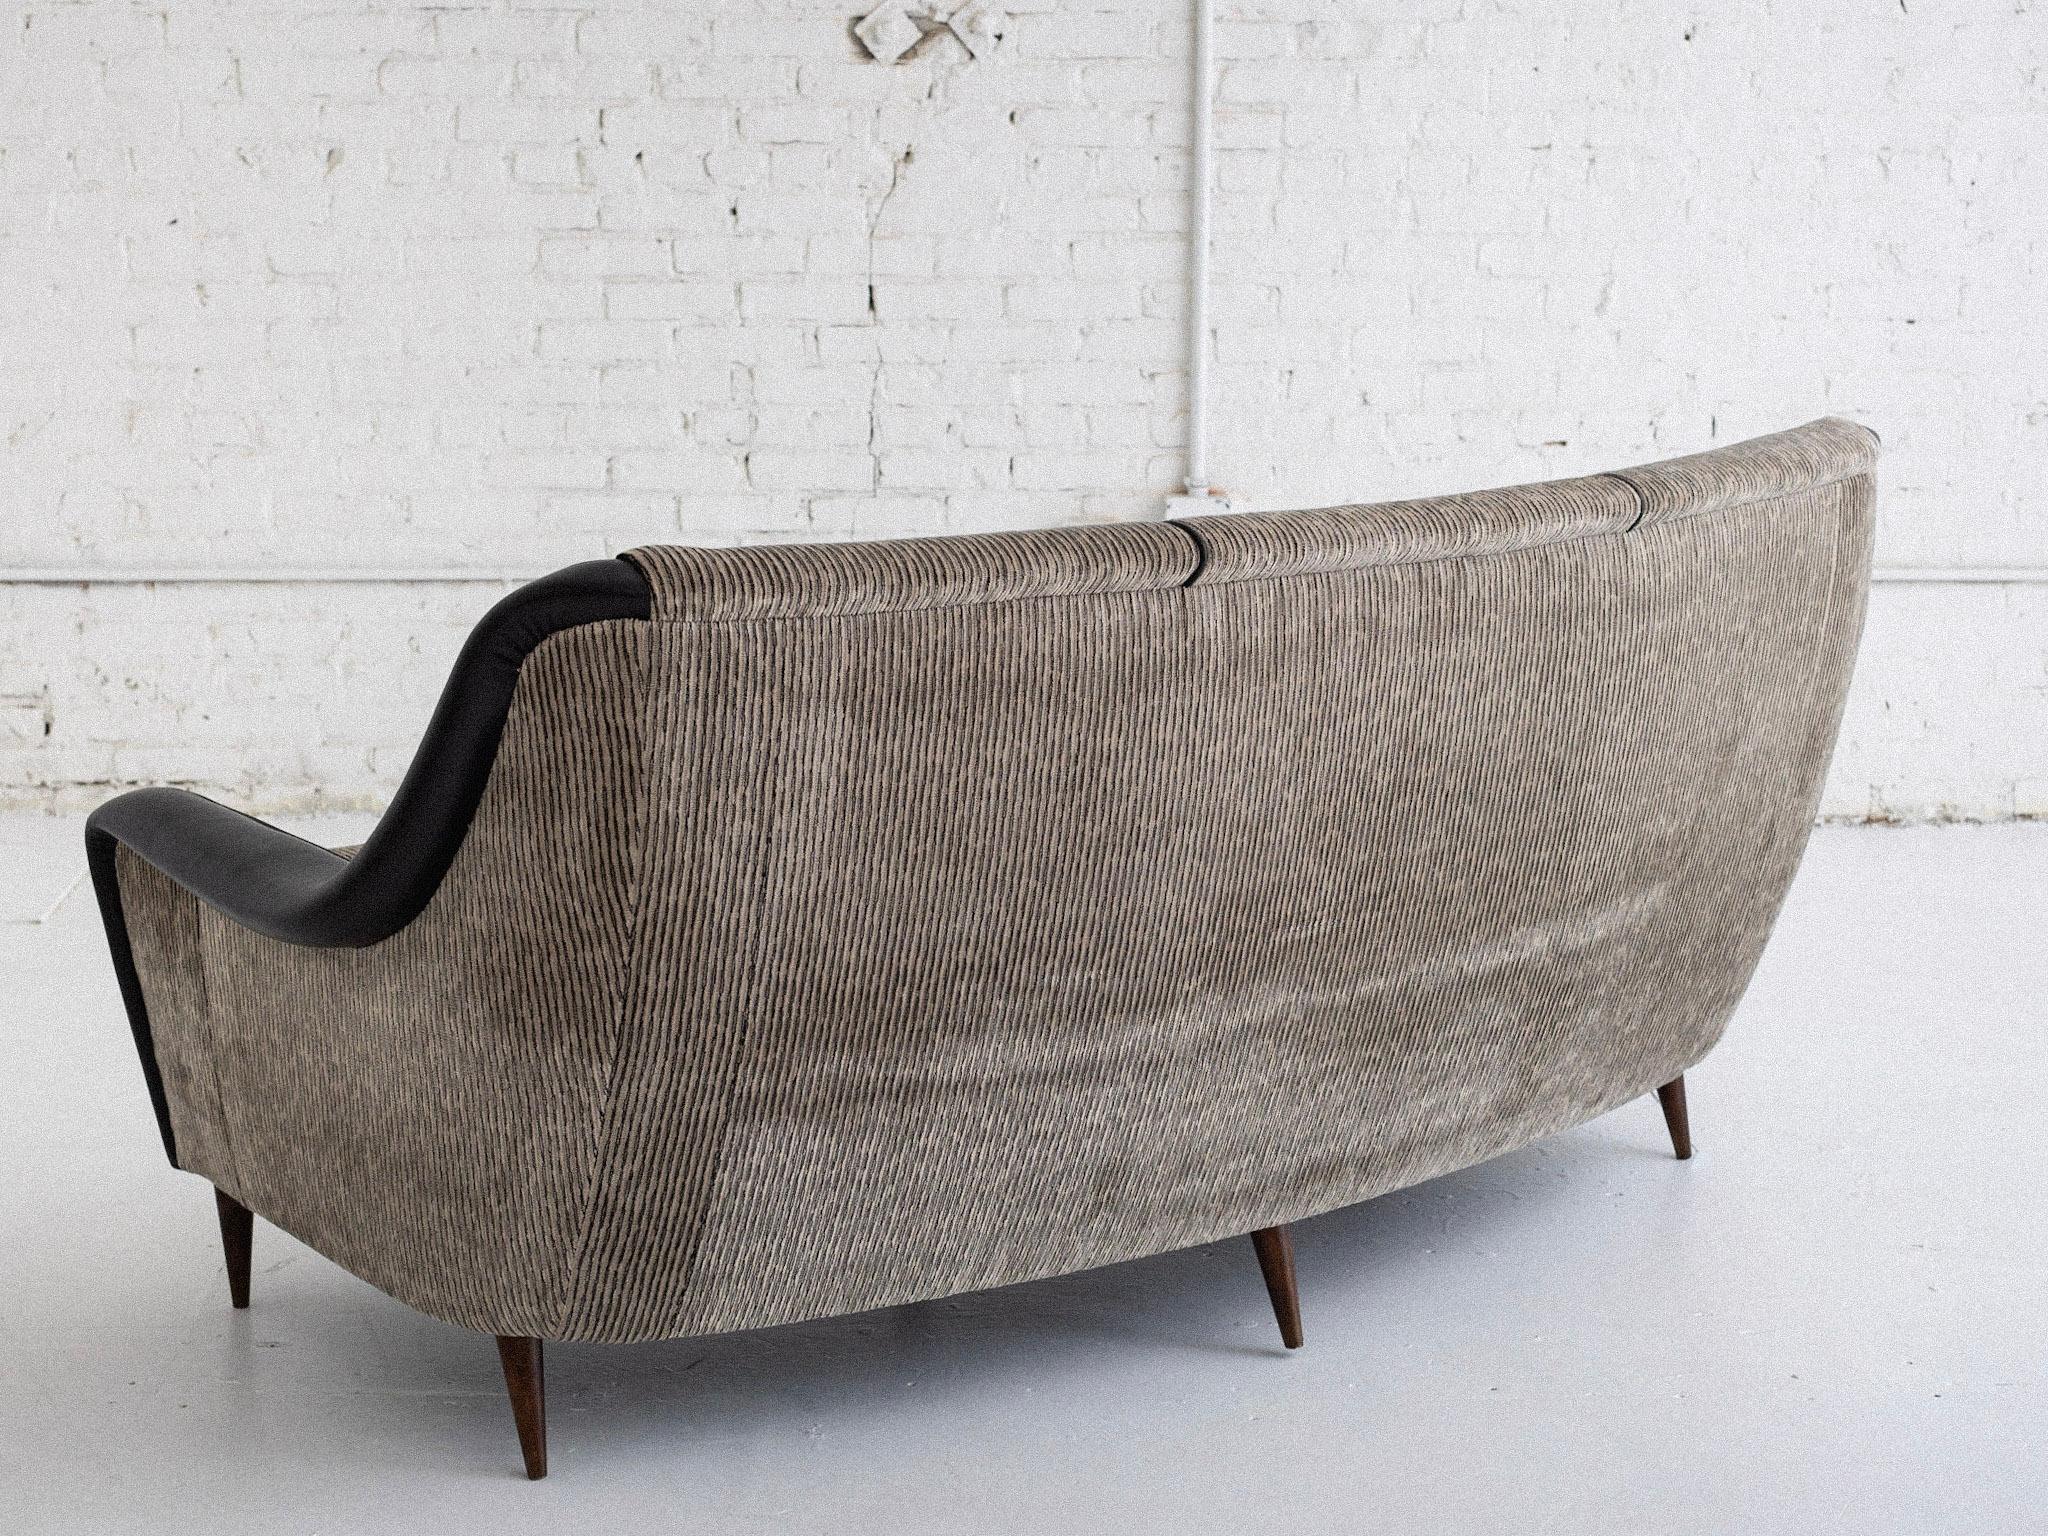 Midcentury Italian Sofa in Striped Velvet and Leather For Sale 8